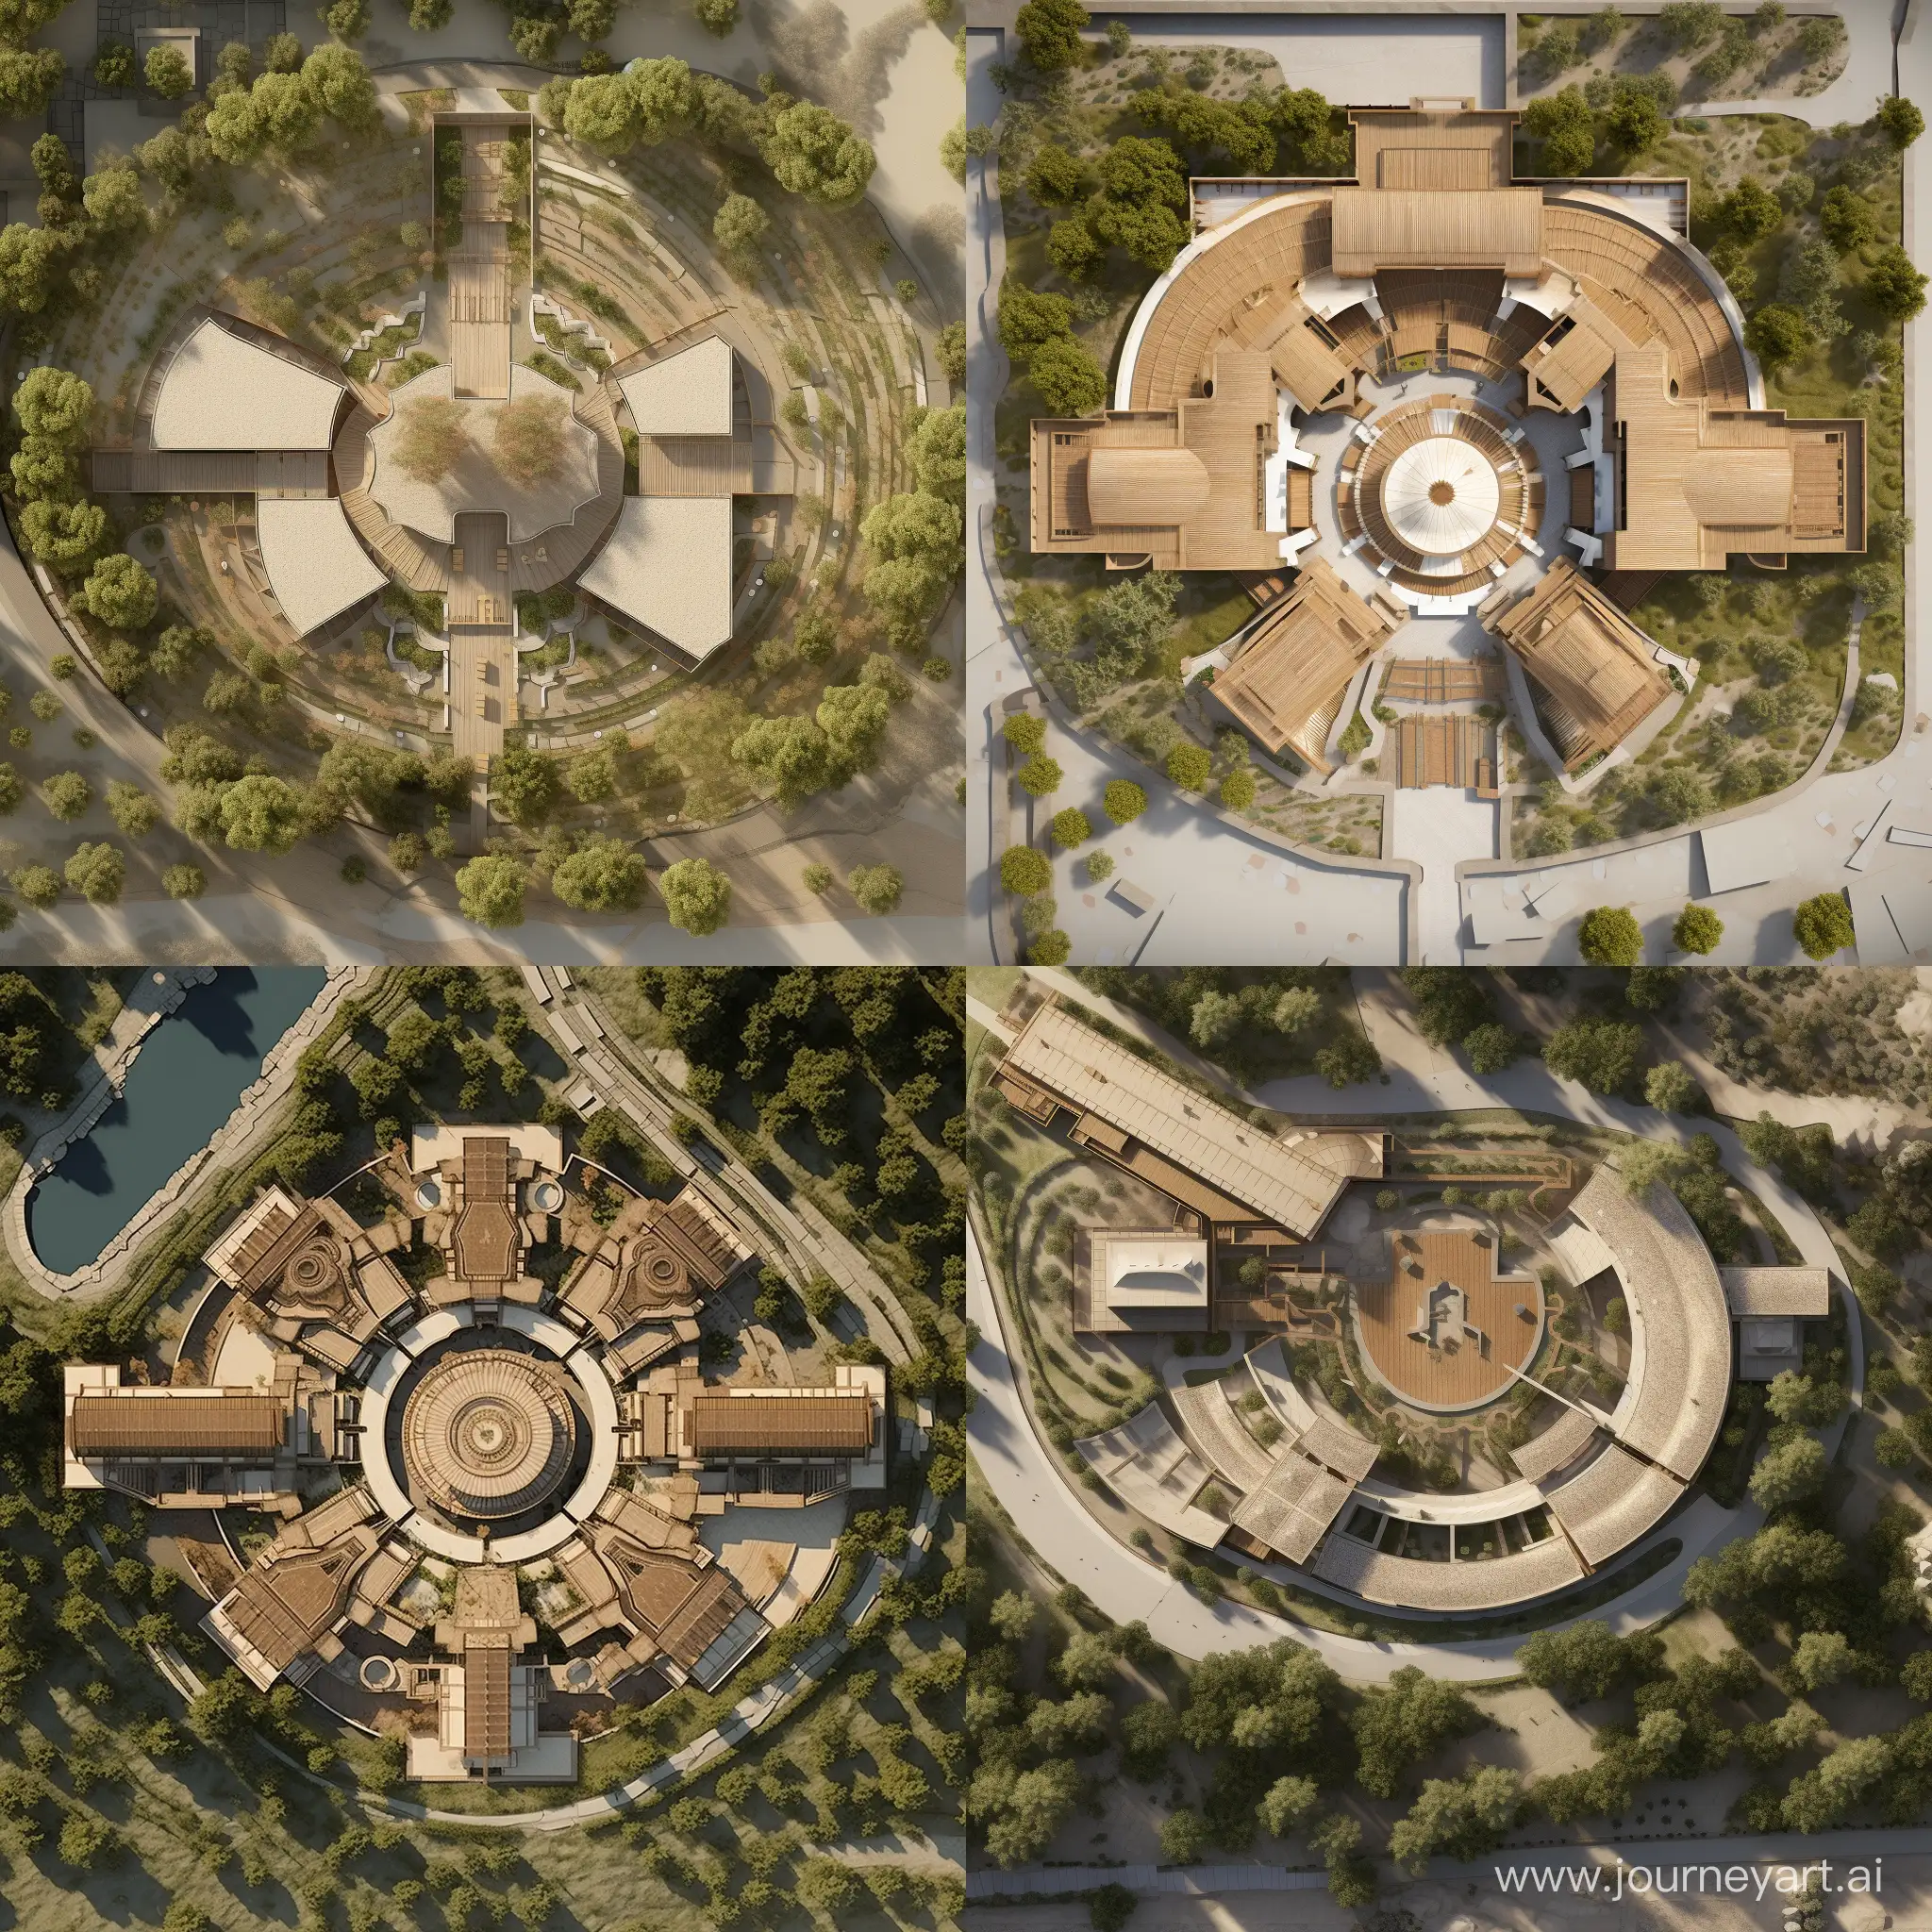 generate a 2d image architectural masterplan of cultural center of parachinar, created from maple tree leaf, reflecting rich history, culture and tradition of pashtun region. desinged in mud and wood. top view plan view